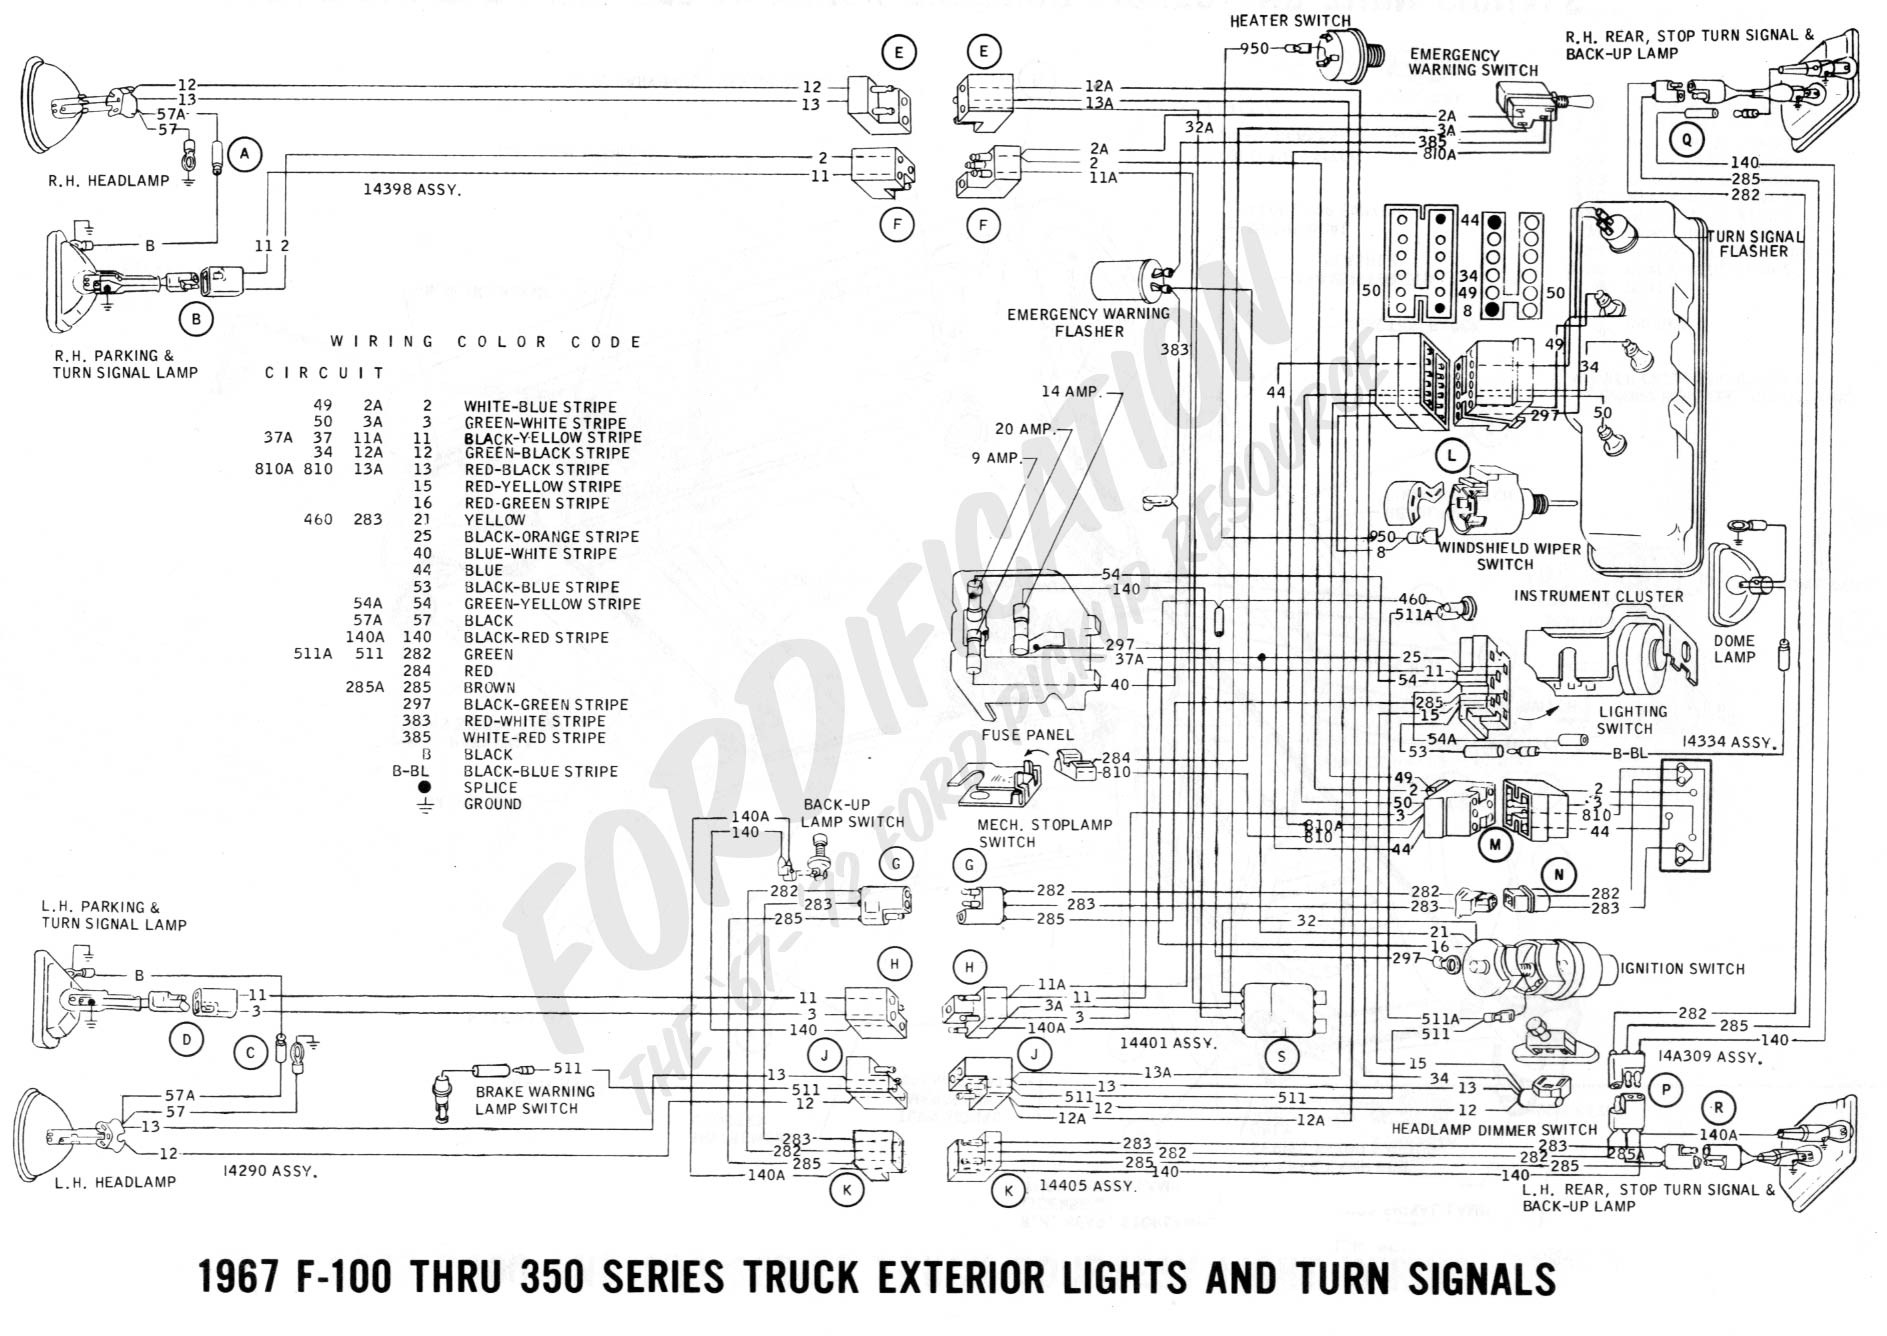 Truck Steering System Diagram ford Truck Technical Drawings and Schematics Section H Wiring Of Truck Steering System Diagram